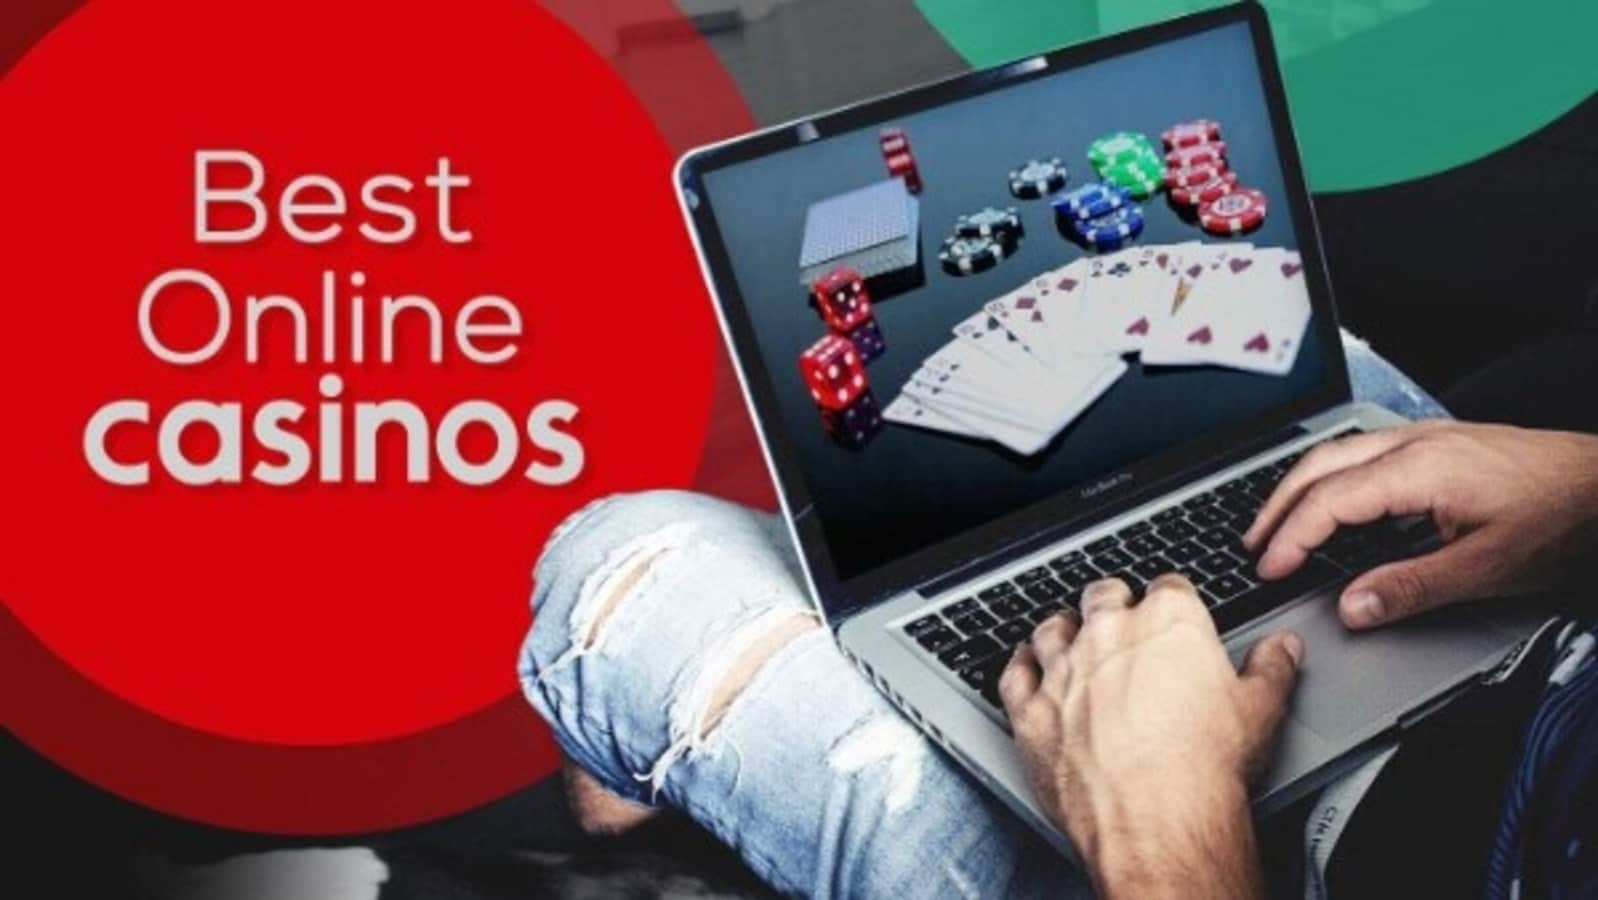 A Simple Plan For online casino sites